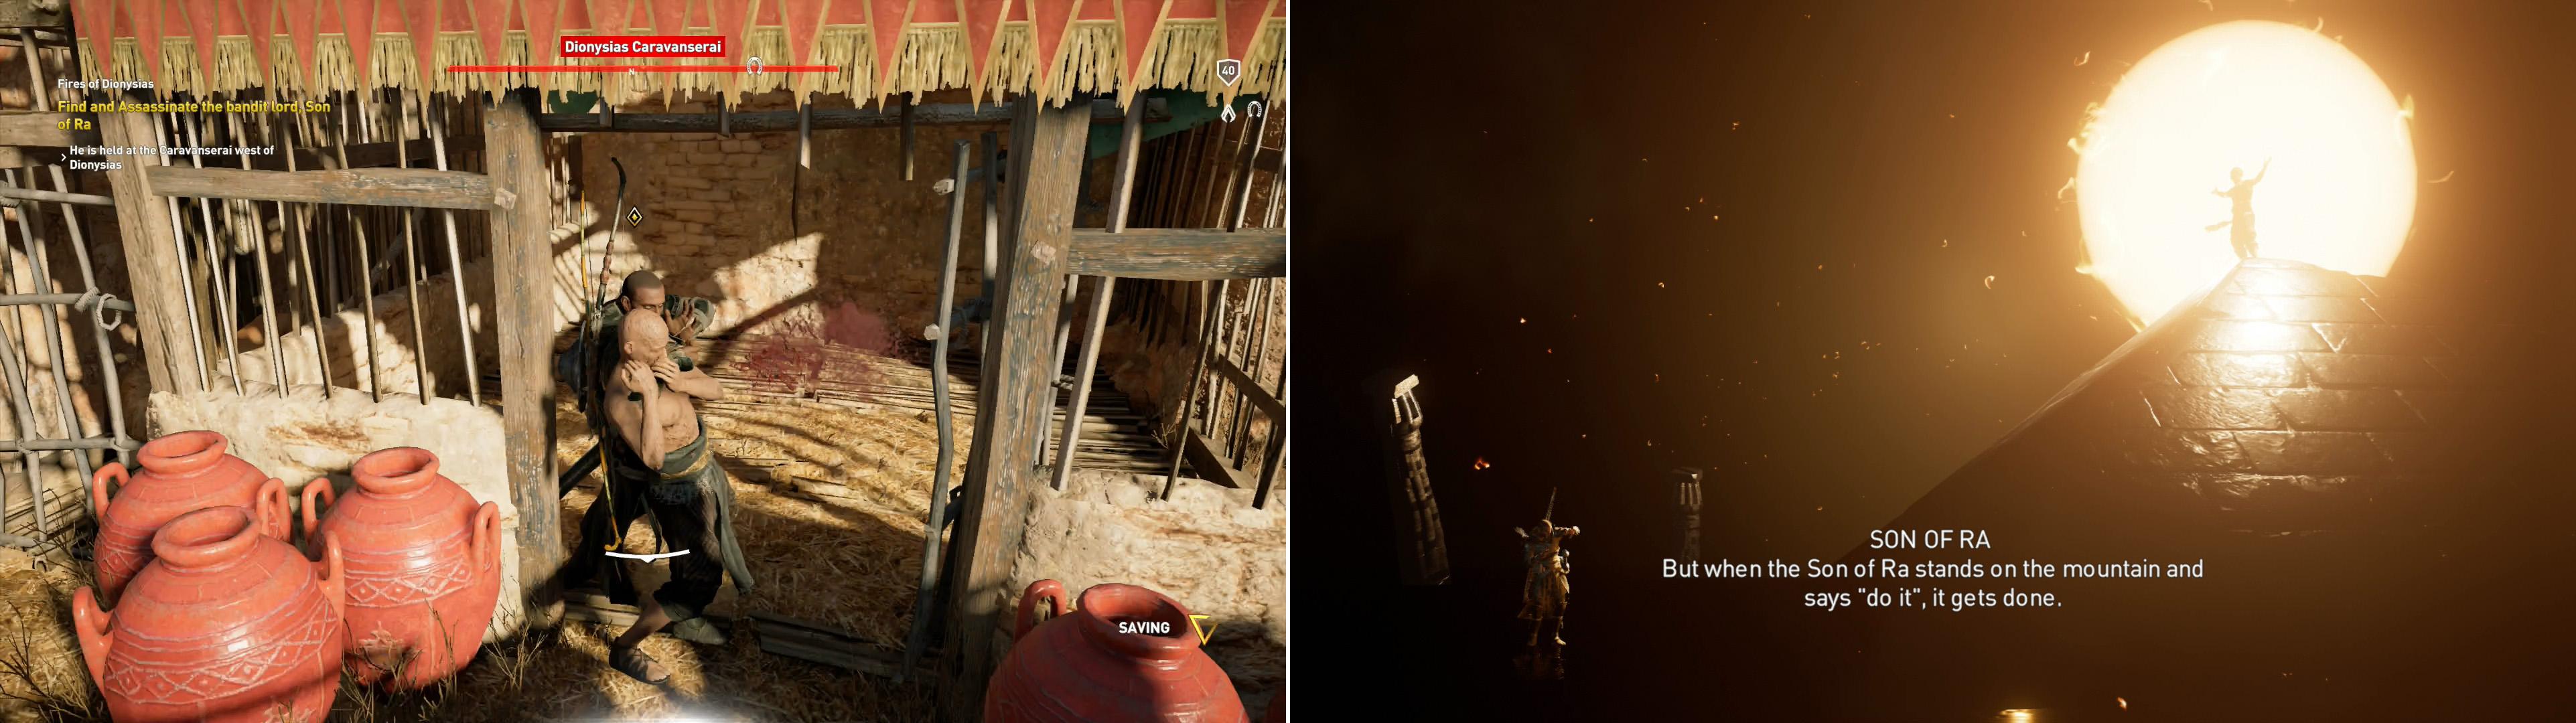 Kill the Son of Ra (left) then witness a scene where Bayek's actions are compared to those of the man he just killed (right).